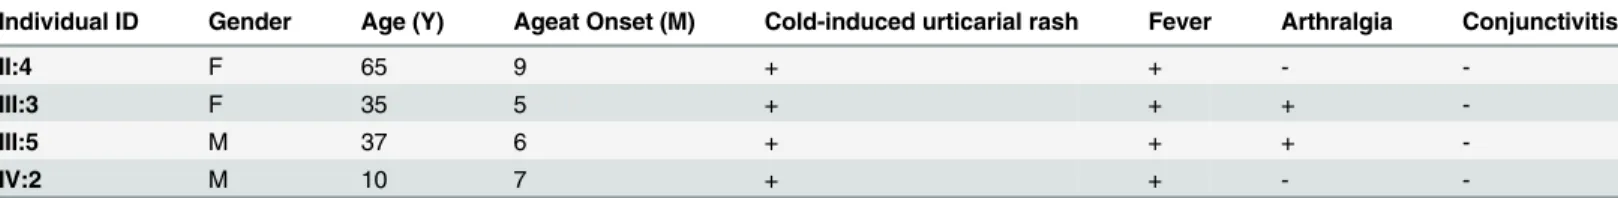 Table 1. Clinical Summary of the Individuals in this Study. M, Male; F, Female; +, Affected; -, Not affected.